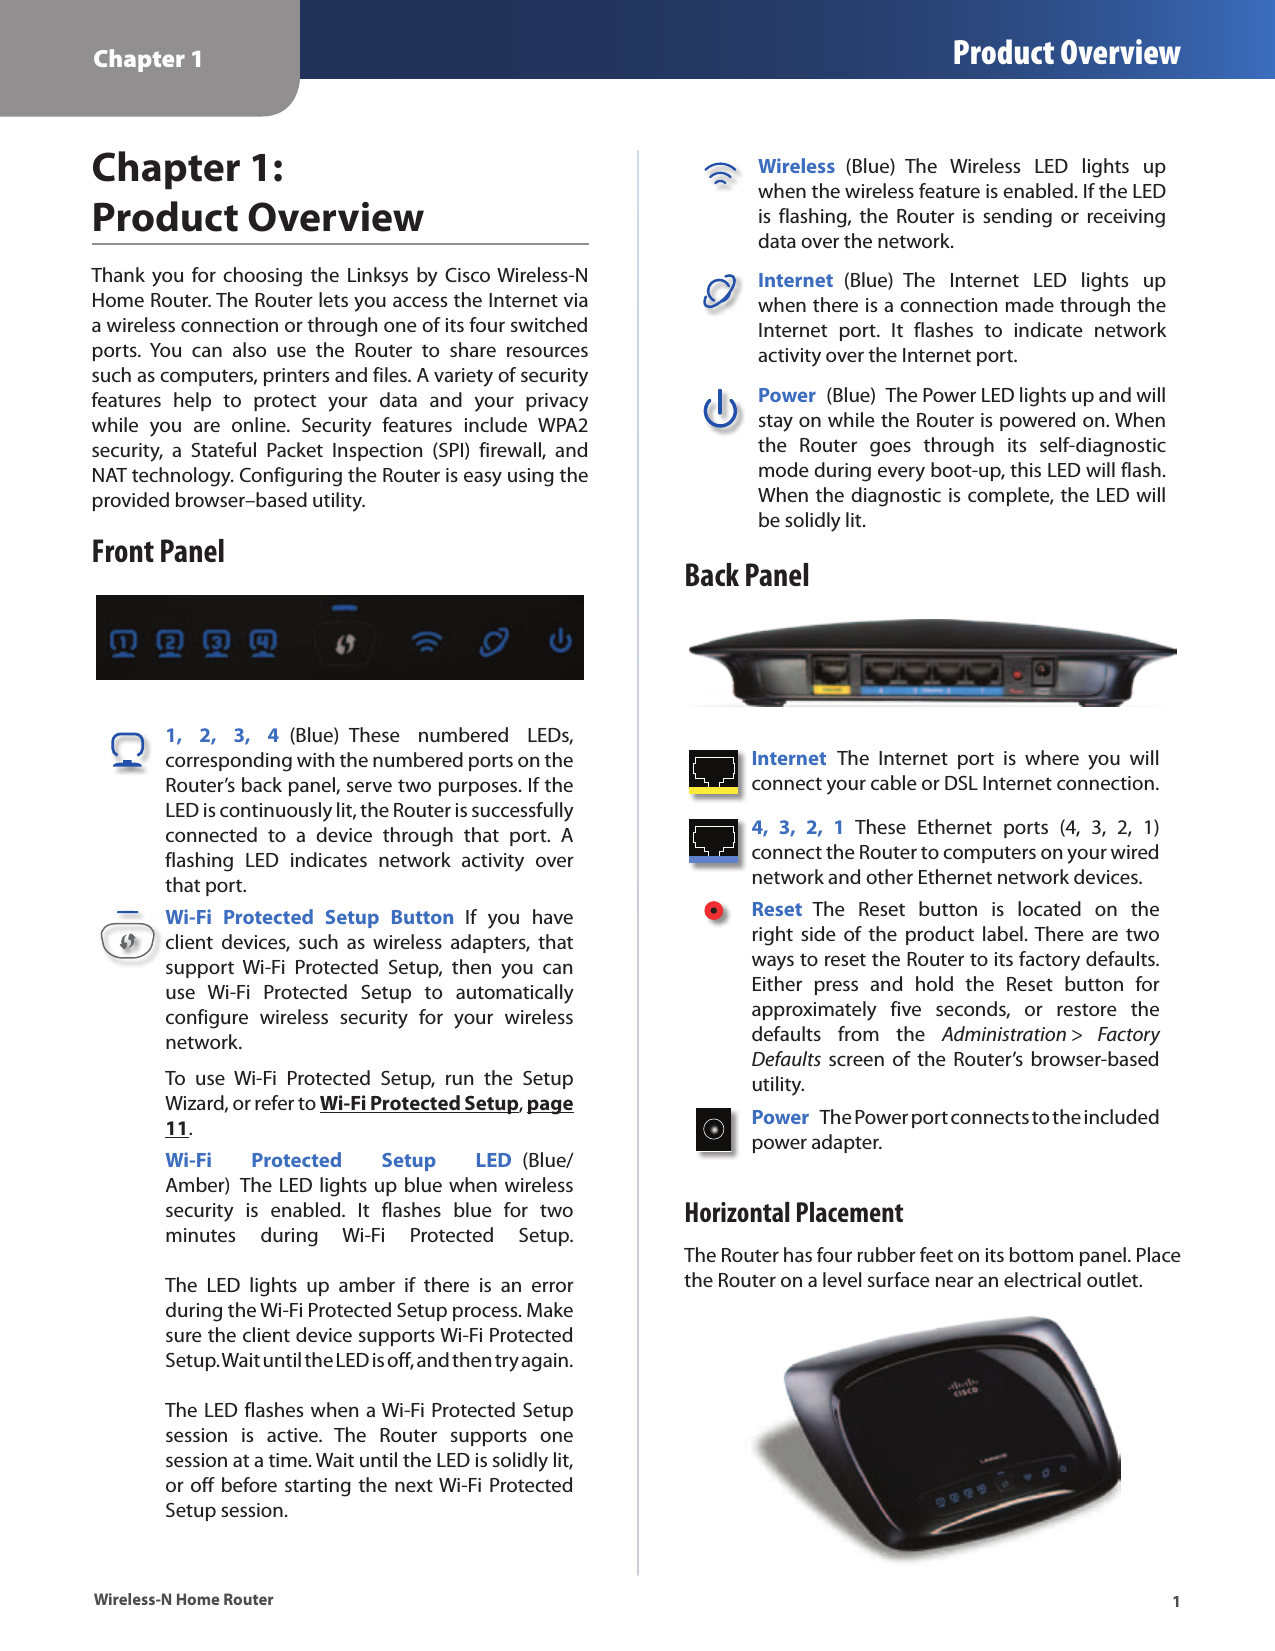 Chapter 1 Product Overview1Wireless-N Home RouterChapter 1:  Product OverviewThank you  for  choosing the  Linksys by  Cisco Wireless-N Home Router. The Router lets you access the Internet via a wireless connection or through one of its four switched ports.  You  can  also  use  the  Router  to  share  resources such as computers, printers and files. A variety of security features  help  to  protect  your  data  and  your  privacy while  you  are  online.  Security  features  include  WPA2 security,  a  Stateful  Packet  Inspection  (SPI)  firewall,  and NAT technology. Configuring the Router is easy using the provided browser–based utility.Front Panel1,  2,  3,  4  (Blue)  These  numbered  LEDs, corresponding with the numbered ports on the Router’s back panel, serve two purposes. If the LED is continuously lit, the Router is successfully connected  to  a  device  through  that  port.  A flashing  LED  indicates  network  activity  over that port. Wi-Fi  Protected  Setup  Button  If  you  have client  devices,  such  as  wireless  adapters,  that support  Wi-Fi  Protected  Setup,  then  you  can use  Wi-Fi  Protected  Setup  to  automatically configure  wireless  security  for  your  wireless network.To  use  Wi-Fi  Protected  Setup,  run  the  Setup Wizard, or refer to Wi-Fi Protected Setup, page 11.Wi-Fi  Protected  Setup  LED  (Blue/Amber)  The LED lights up blue when wireless security  is  enabled.  It  flashes  blue  for  two minutes  during  Wi-Fi  Protected  Setup.    The  LED  lights  up  amber  if  there  is  an  error during the Wi-Fi Protected Setup process. Make sure the client device supports Wi-Fi Protected Setup. Wait until the LED is off, and then try again.   The LED flashes when a Wi-Fi Protected Setup session  is  active.  The  Router  supports  one session at a time. Wait until the LED is solidly lit, or off before starting the next Wi-Fi Protected Setup session.Wireless  (Blue)  The  Wireless  LED  lights  up when the wireless feature is enabled. If the LED is  flashing,  the  Router  is  sending  or  receiving data over the network.Internet  (Blue)  The  Internet  LED  lights  up when there is a connection made through the Internet  port.  It  flashes  to  indicate  network activity over the Internet port. Power  (Blue)  The Power LED lights up and will stay on while the Router is powered on. When the  Router  goes  through  its  self-diagnostic mode during every boot-up, this LED will flash. When the diagnostic is complete, the LED will be solidly lit.Back PanelInternet  The  Internet  port  is  where  you  will connect your cable or DSL Internet connection. 4,  3,  2,  1  These  Ethernet  ports  (4,  3,  2,  1) connect the Router to computers on your wired network and other Ethernet network devices. Reset  The  Reset  button  is  located  on  the right  side  of  the  product  label. There  are  two ways to reset the Router to its factory defaults. Either  press  and  hold  the  Reset  button  for approximately  five  seconds,  or  restore  the defaults  from  the  Administration &gt;  Factory Defaults  screen  of the  Router’s browser-based utility. Power  The Power port connects to the included power adapter.Horizontal PlacementThe Router has four rubber feet on its bottom panel. Place the Router on a level surface near an electrical outlet.